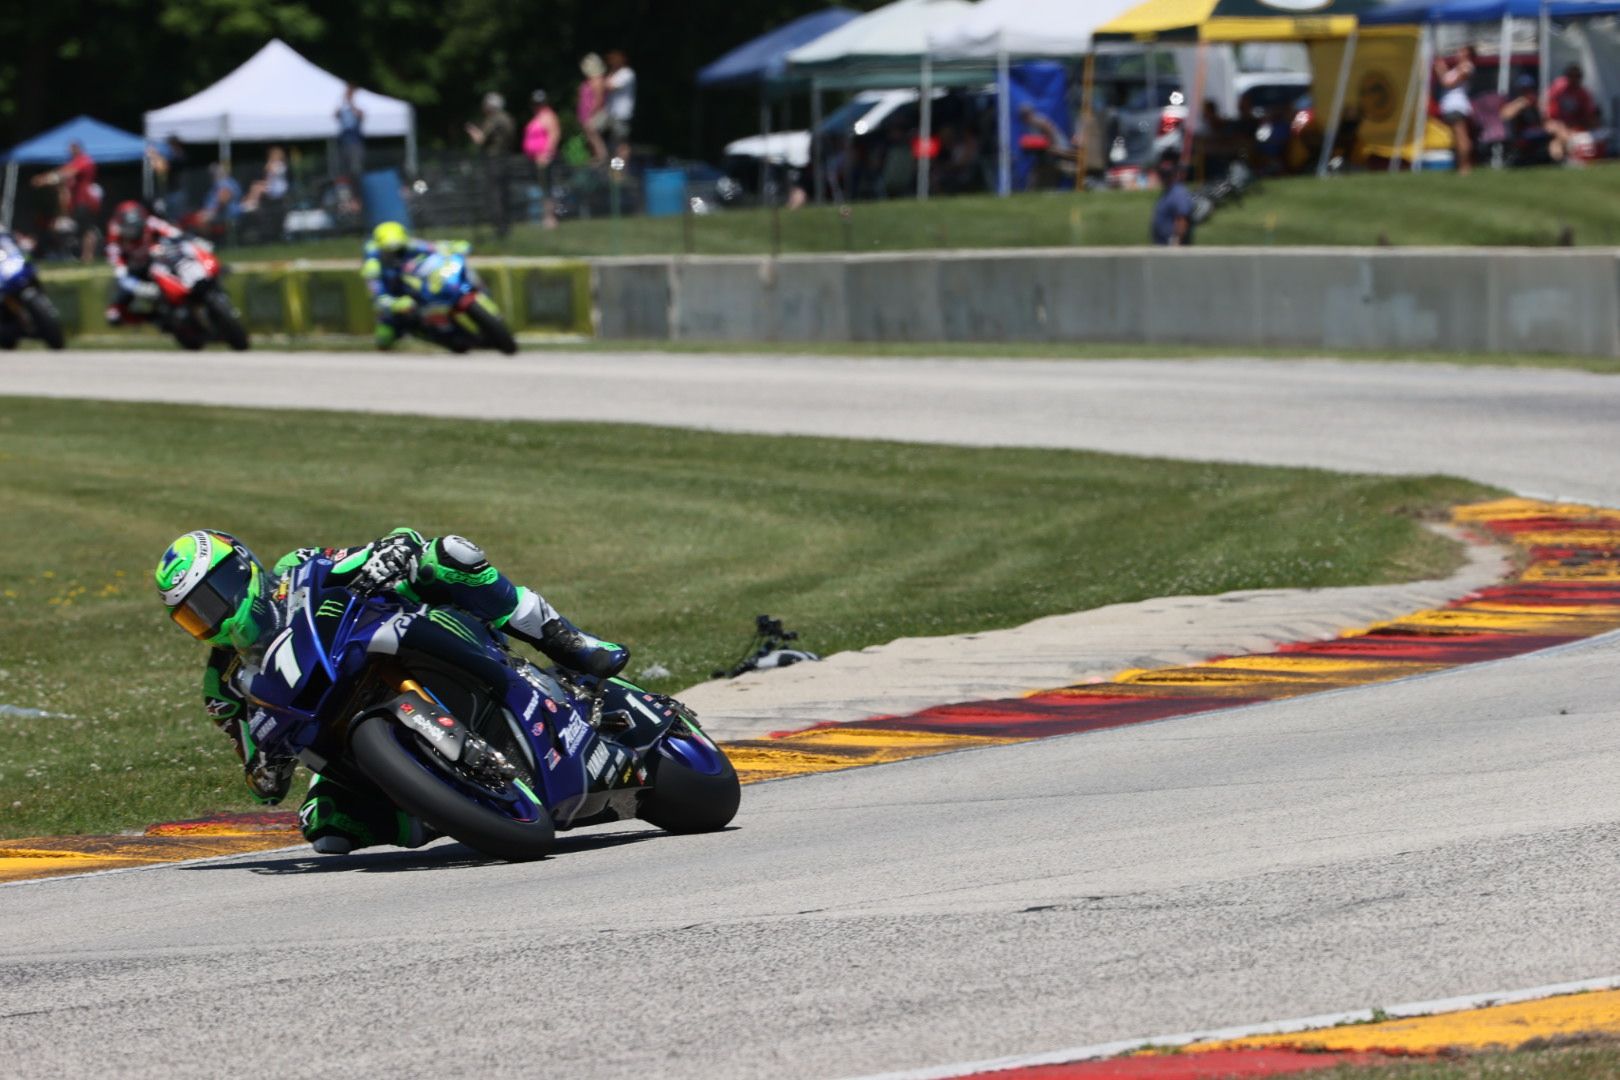 MotoAmerica race at Road America with no fans attending